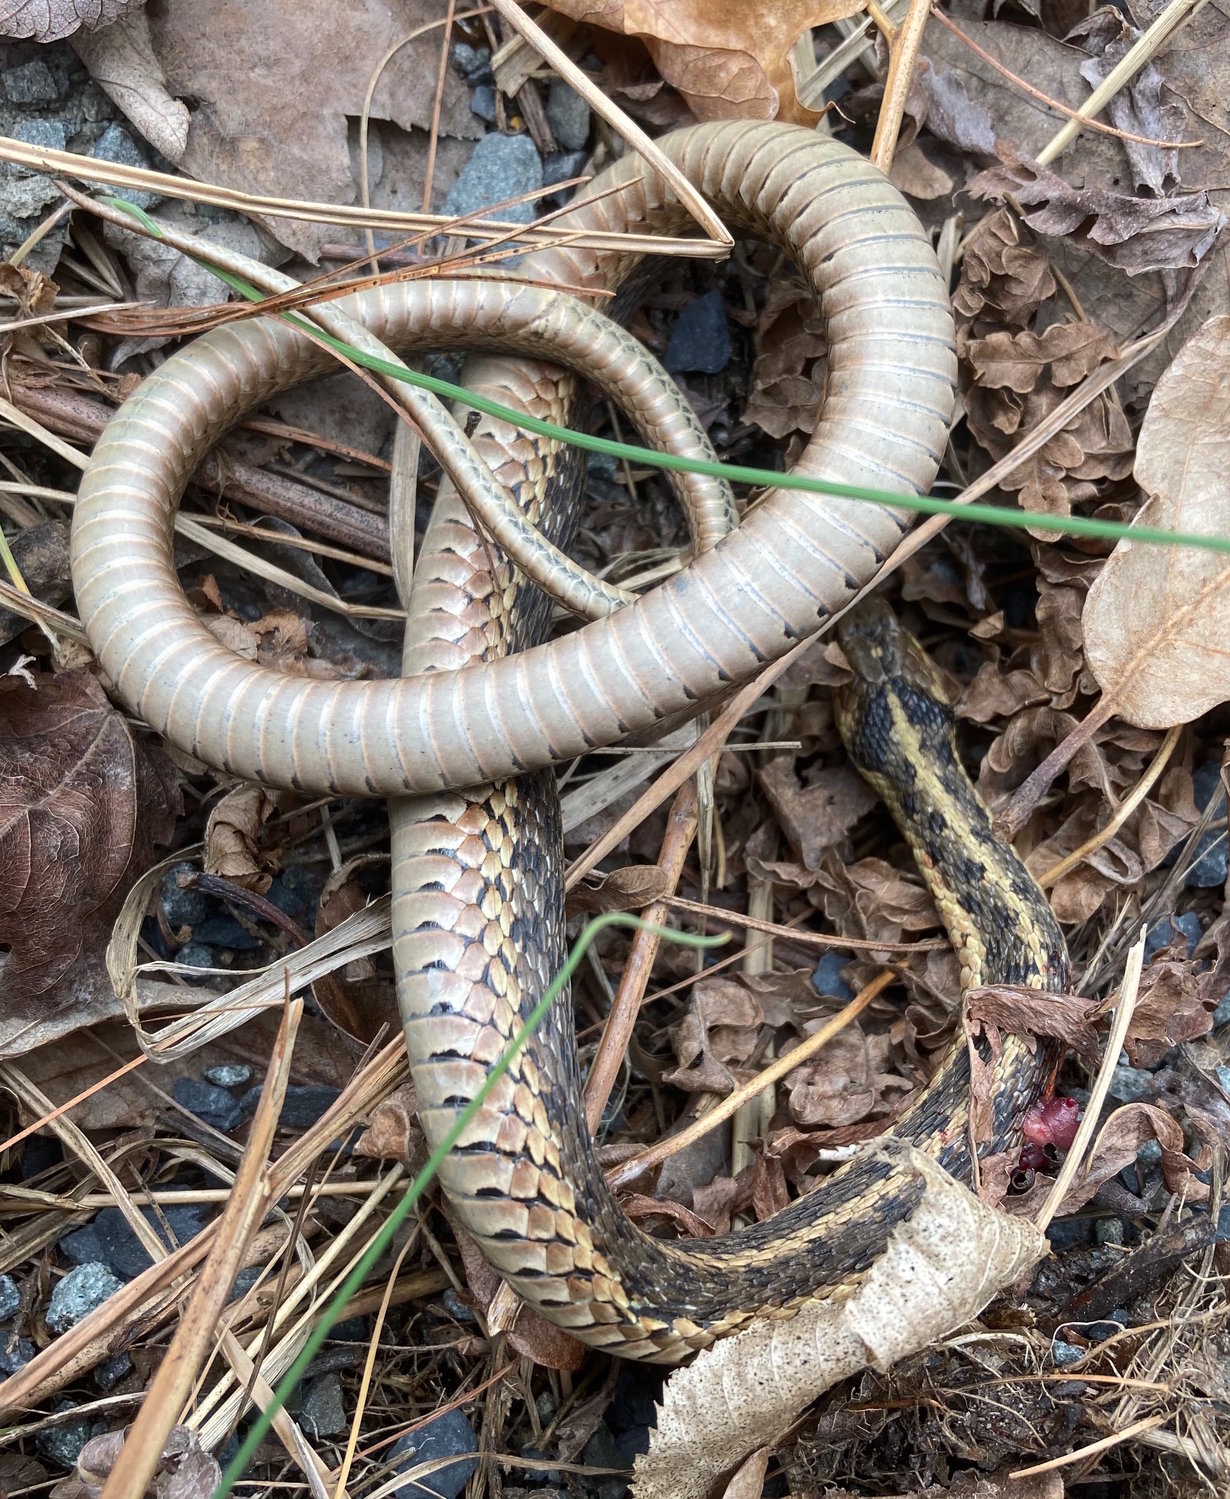 The wound of the ill-fated Eastern garter snake described in this column can be seen at the lower right corner of this photo.